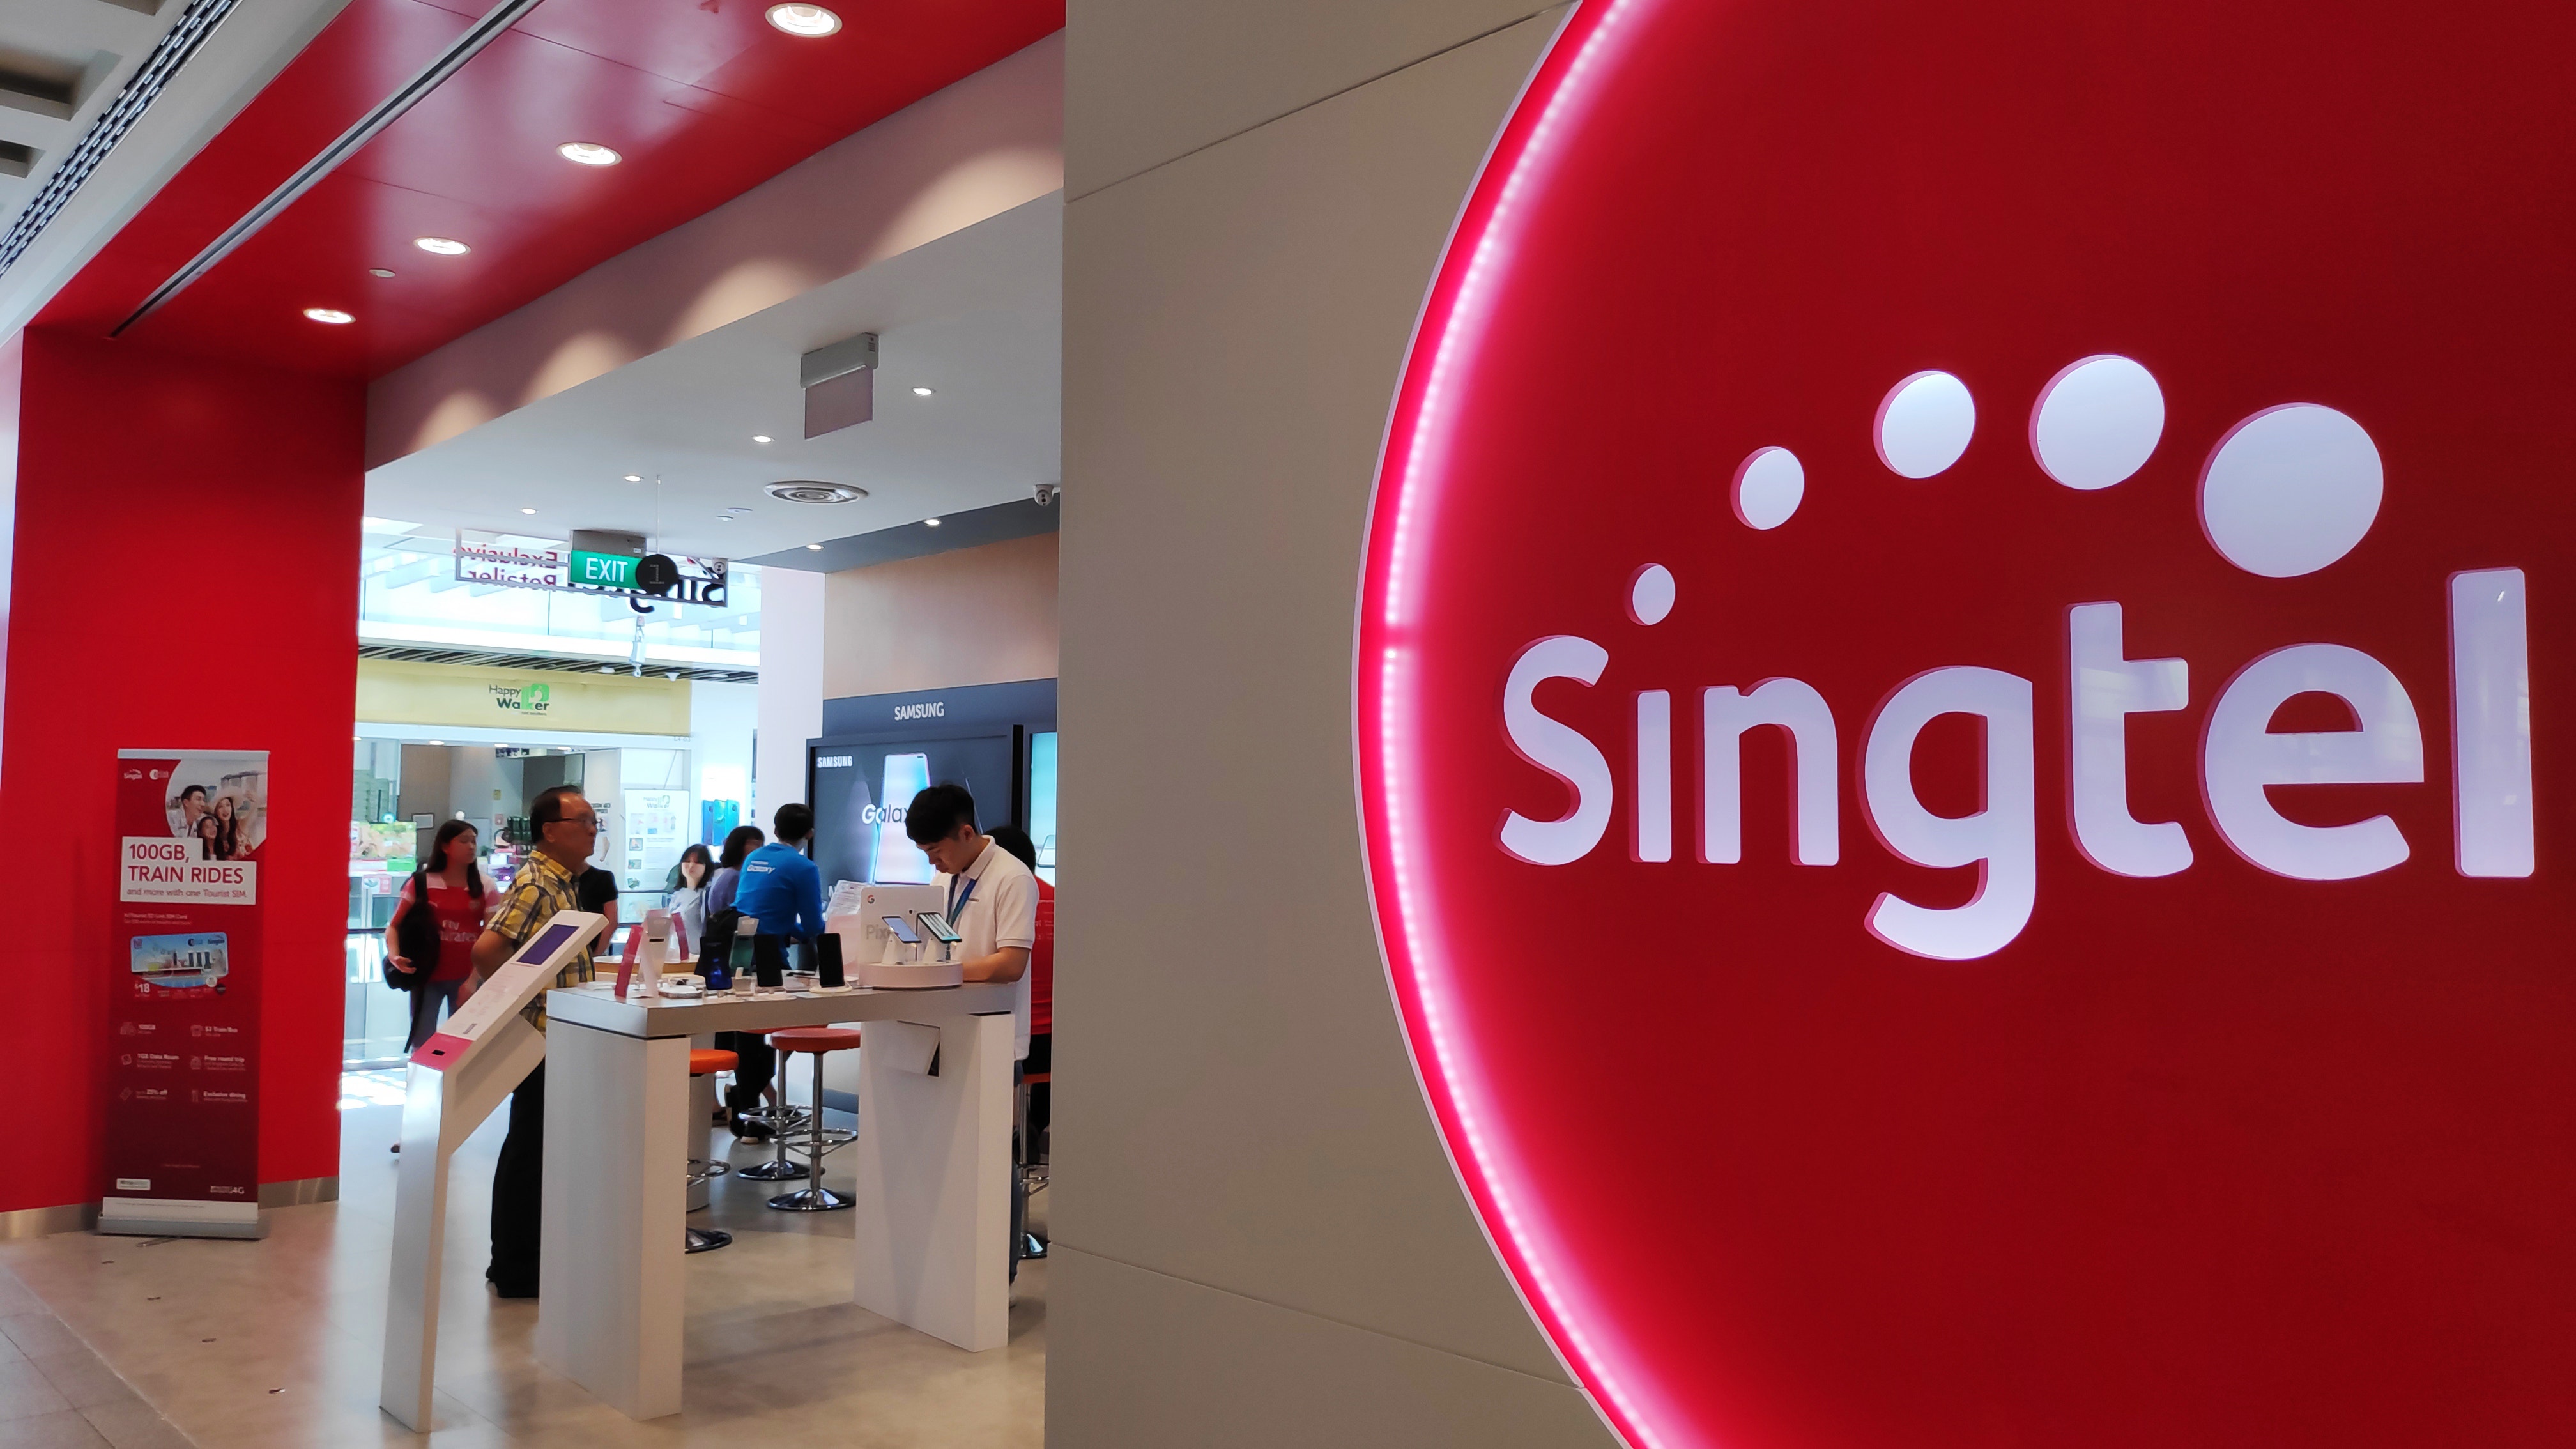 Singapore Telecom Major To Sell $1.6B Stake In India's Airtel To Boost 5G, Growth Initiatives